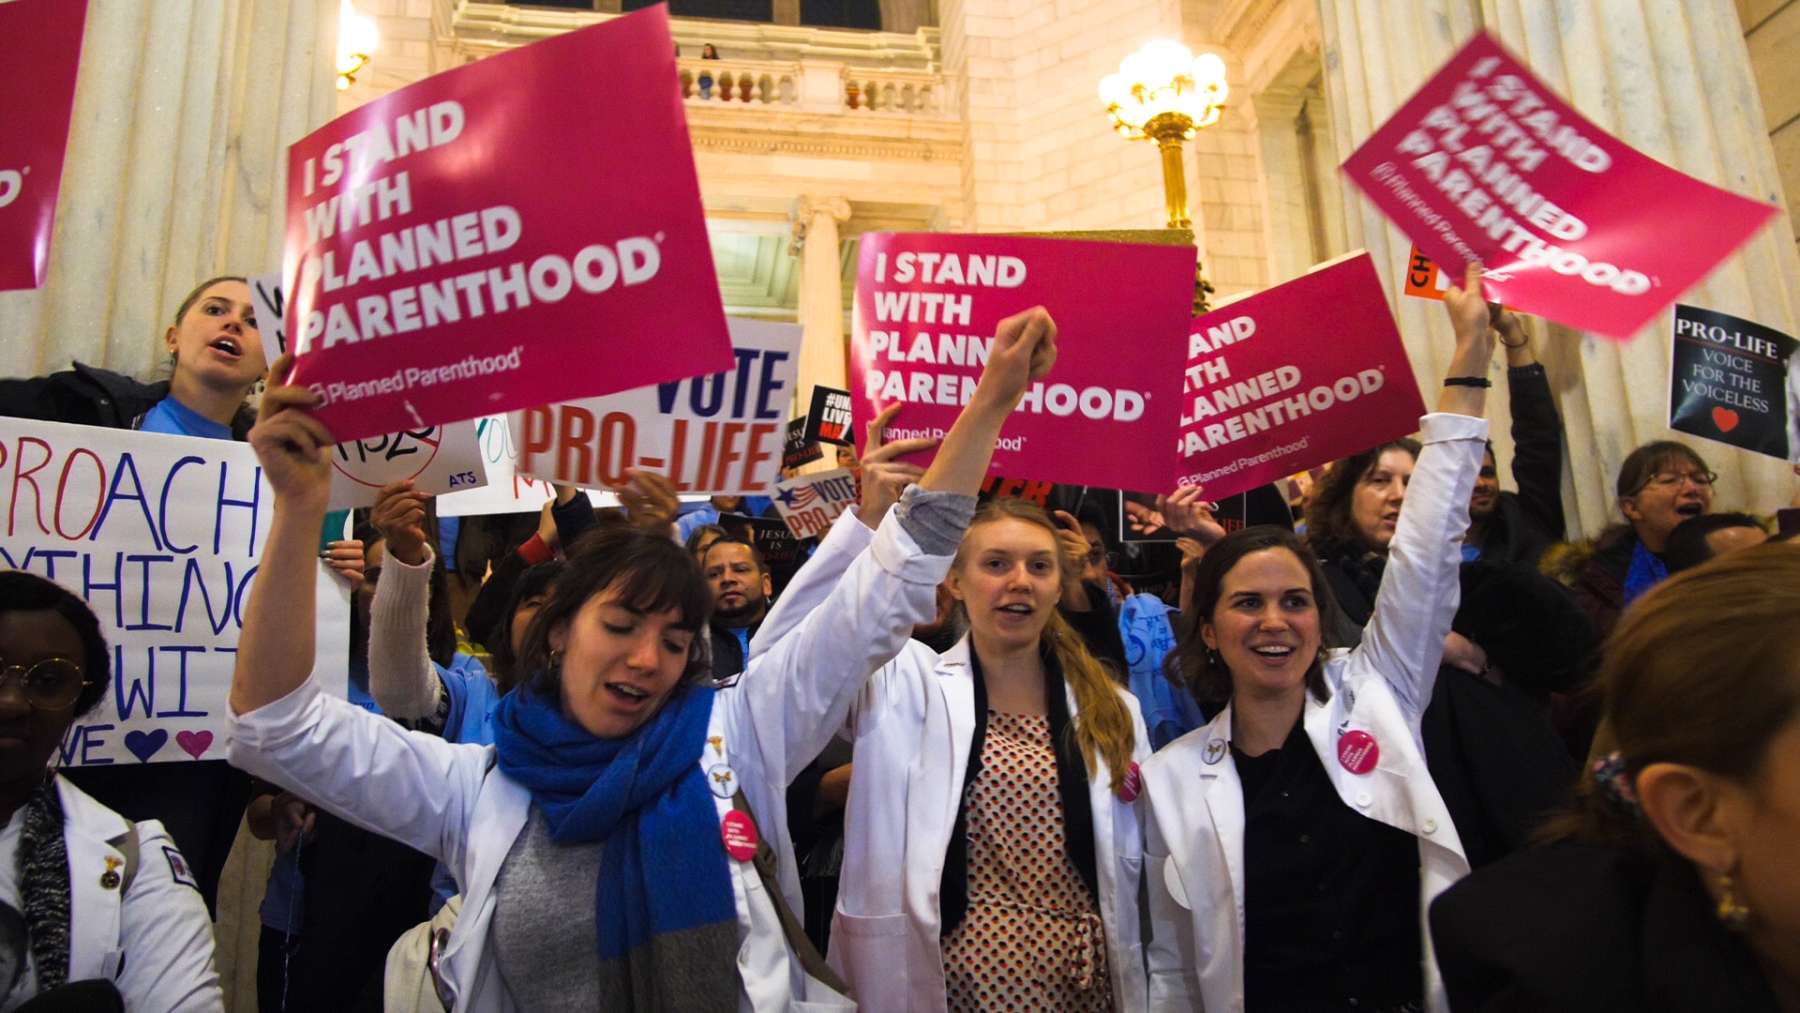 Rhode Island News: Selene Means: Photos from the House hearing on the Reproductive Health Care Act